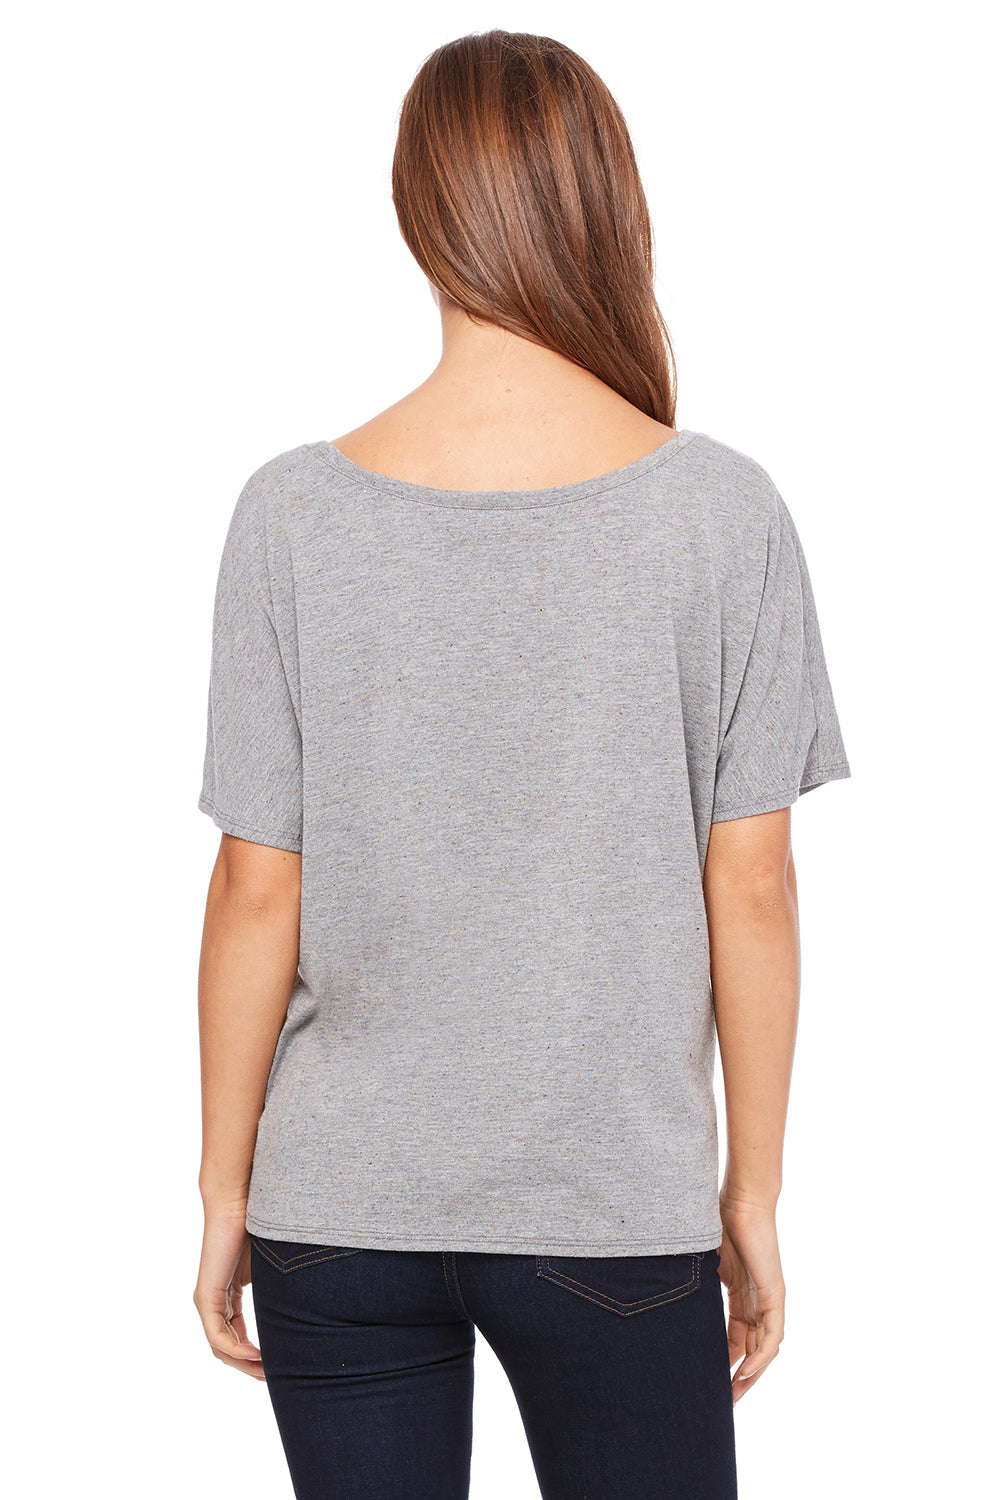 Bella + Canvas 8816 Womens Slouchy Short Sleeve Wide Neck T-Shirt Heather Deep Grey Speckled Back